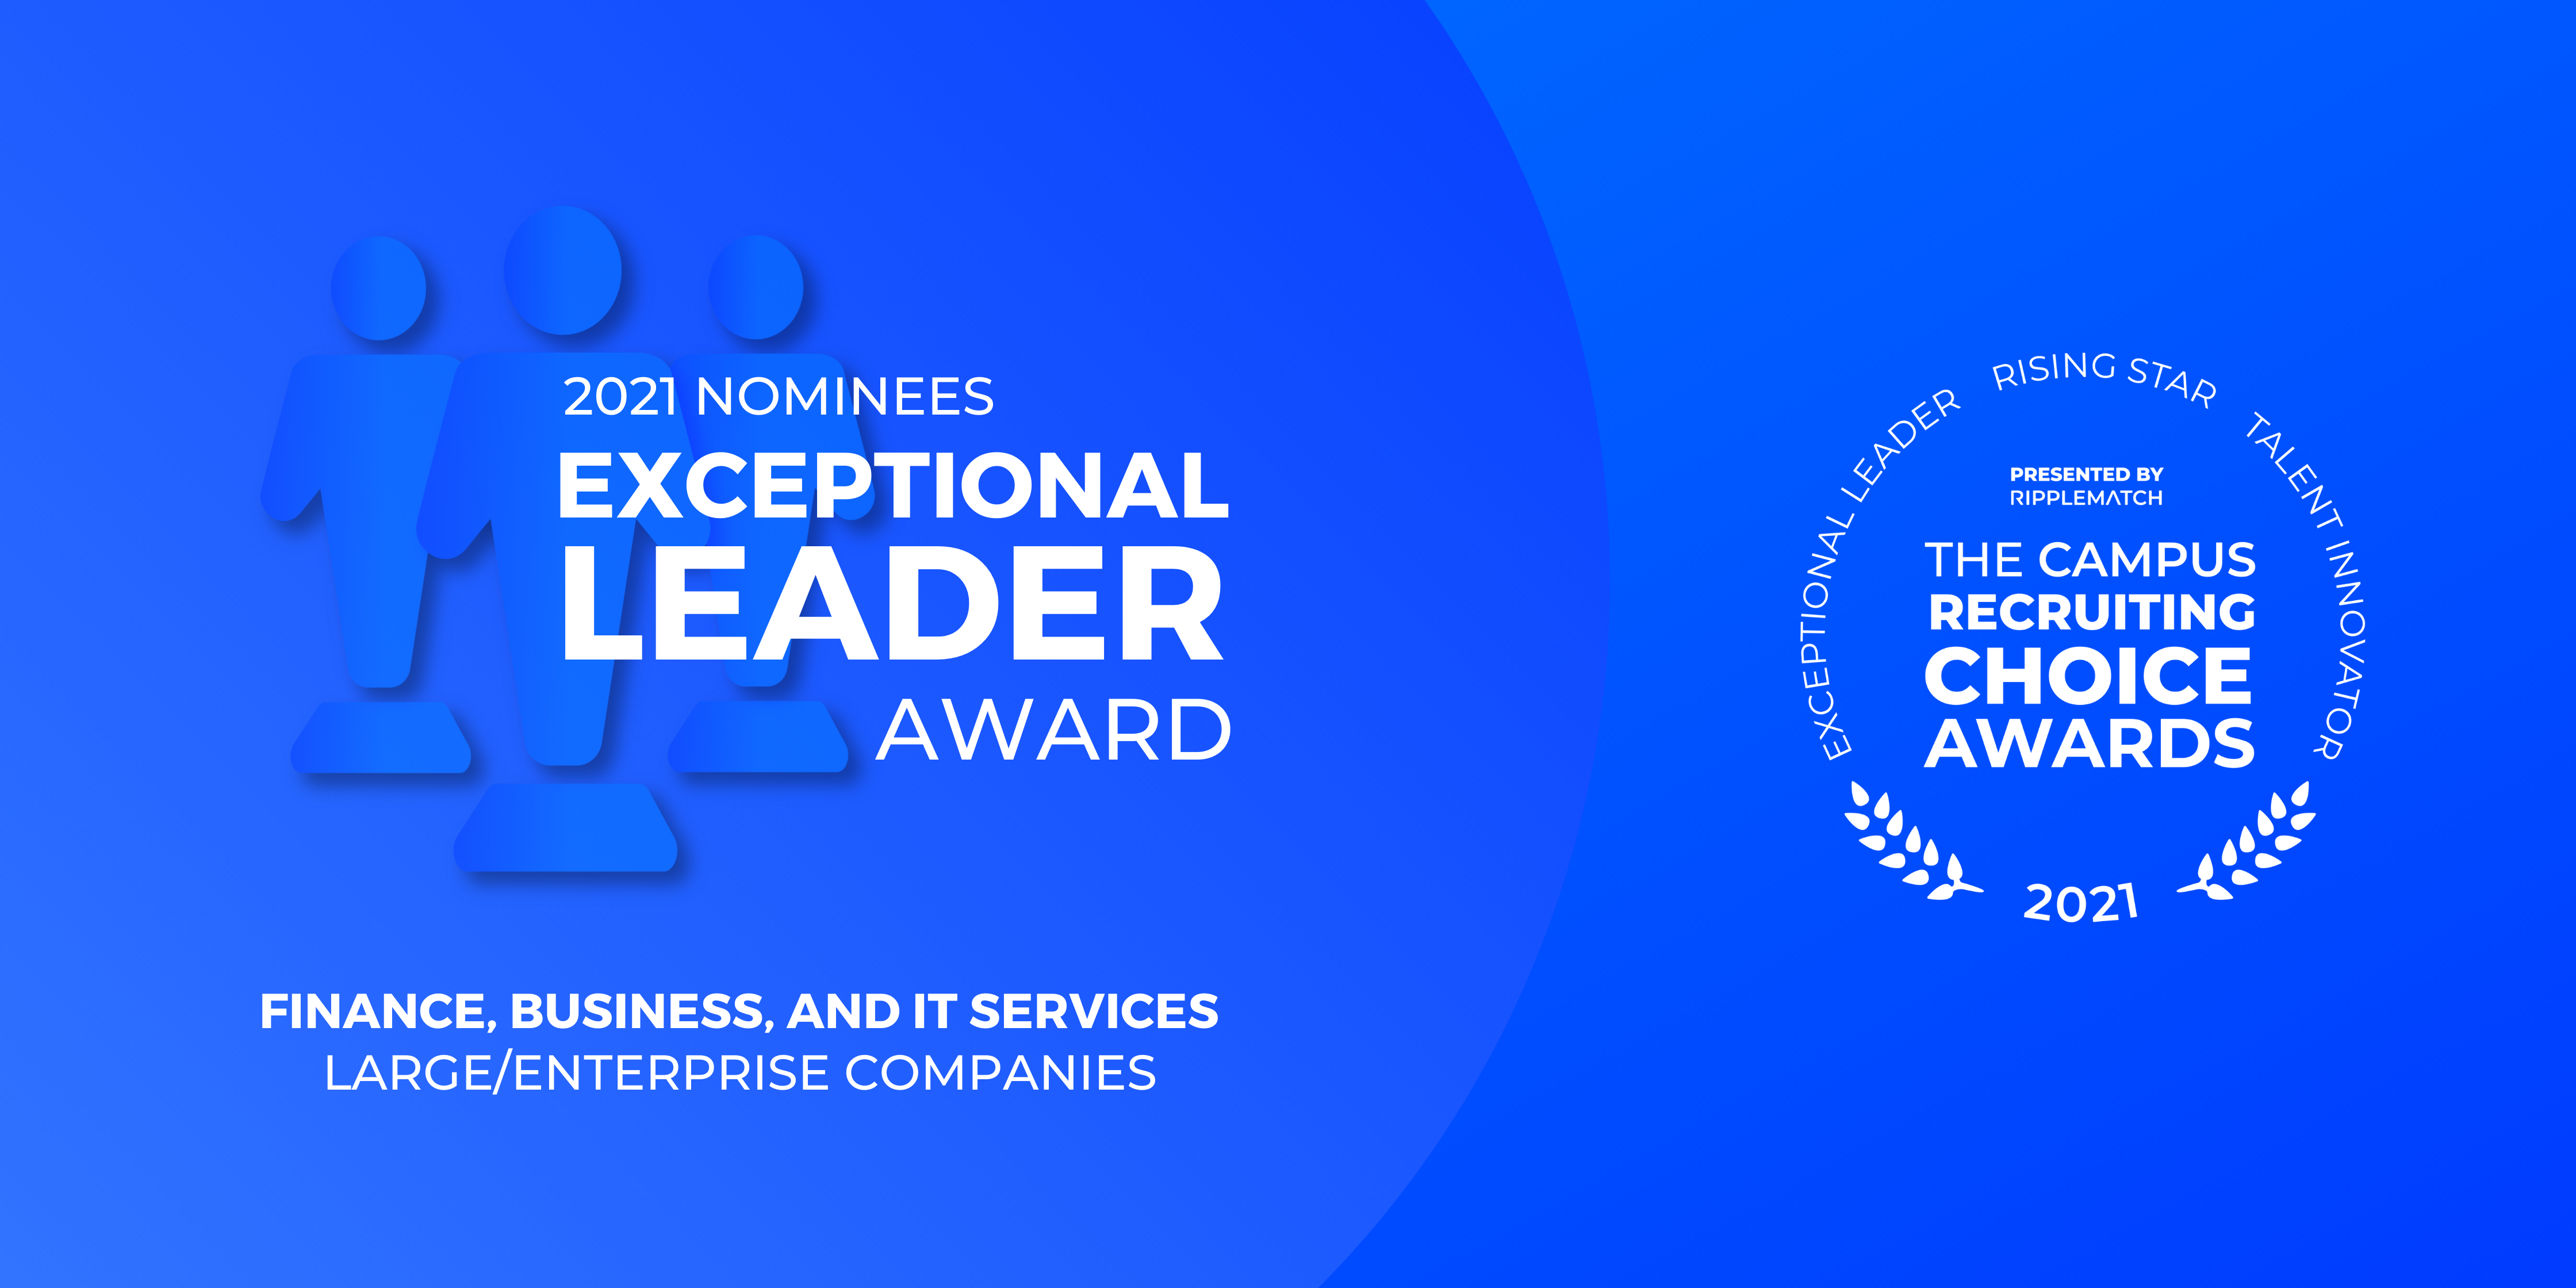 Exceptional Leader Award - Finance, Business, and IT Services | Large/Enterprise Companies